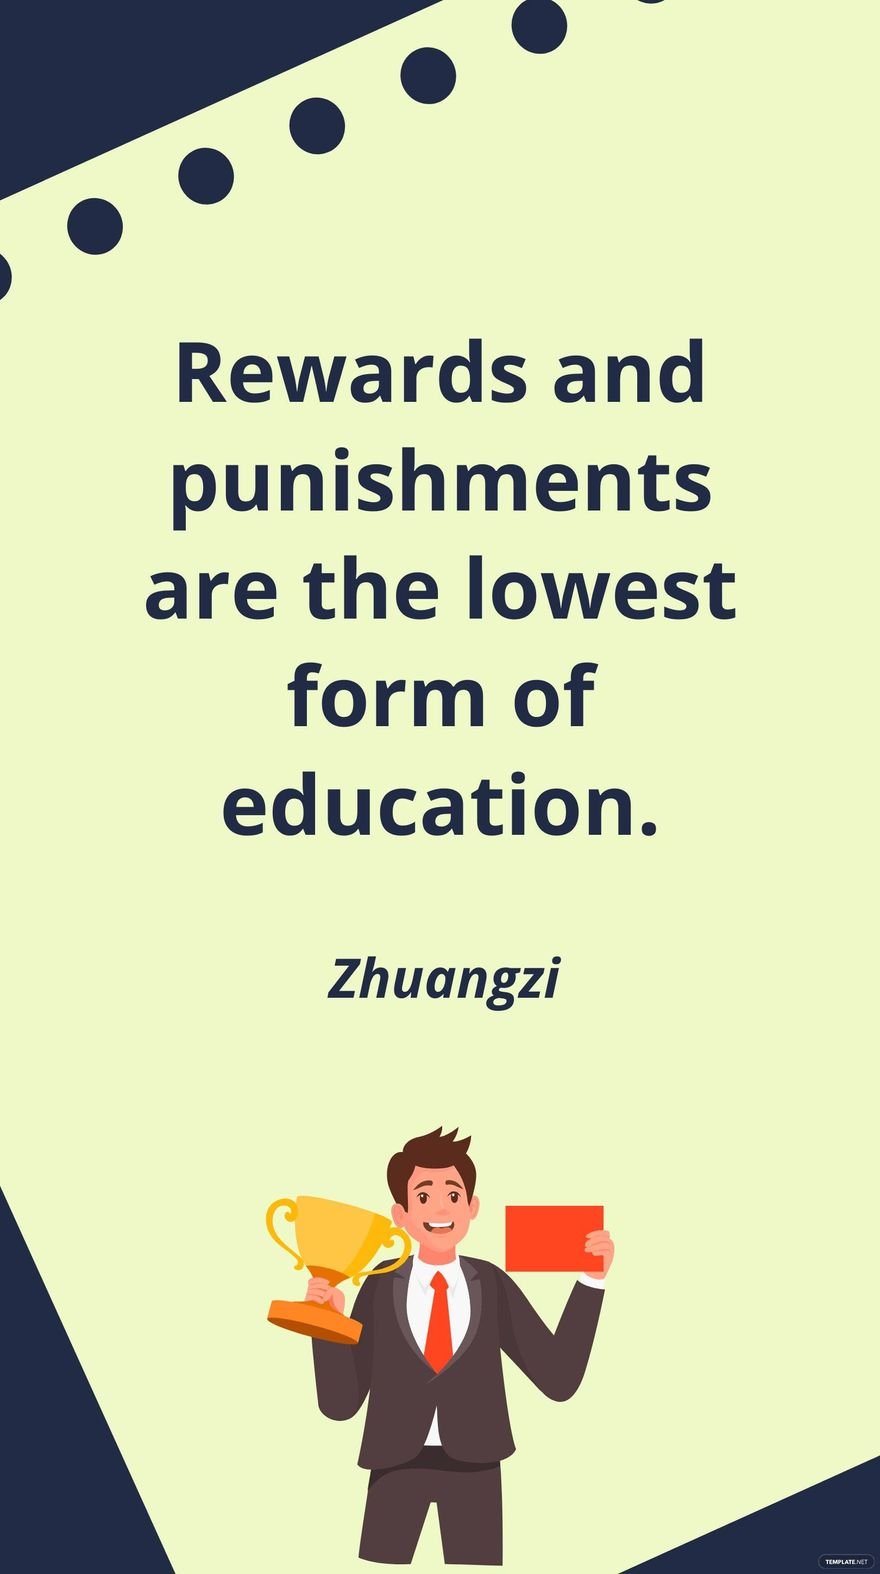 Free Zhuangzi - Rewards and punishments are the lowest form of education.